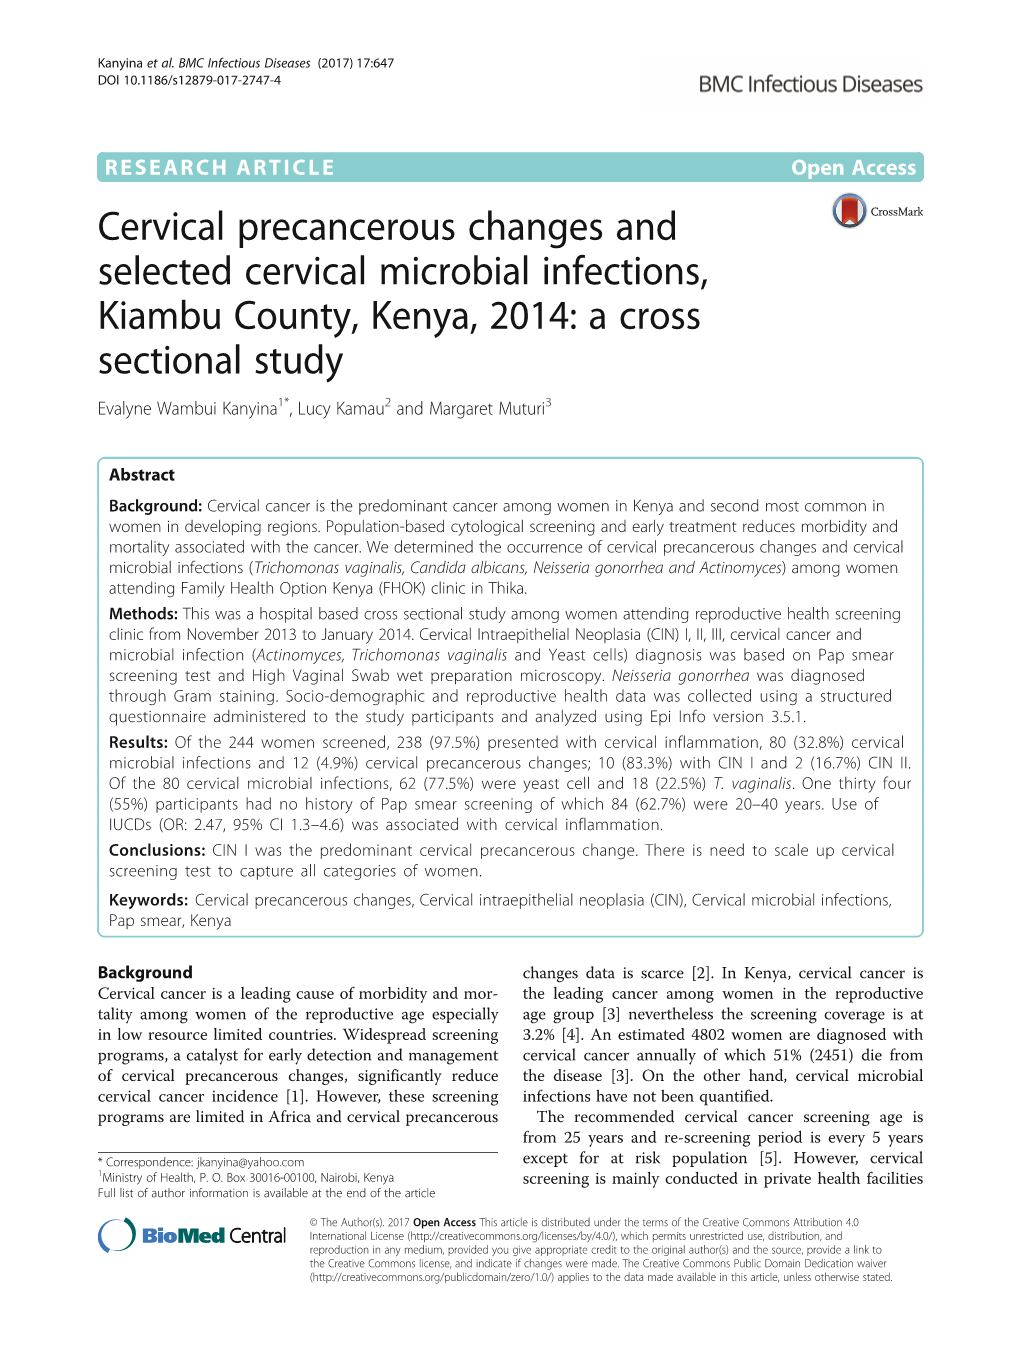 Cervical Precancerous Changes and Selected Cervical Microbial